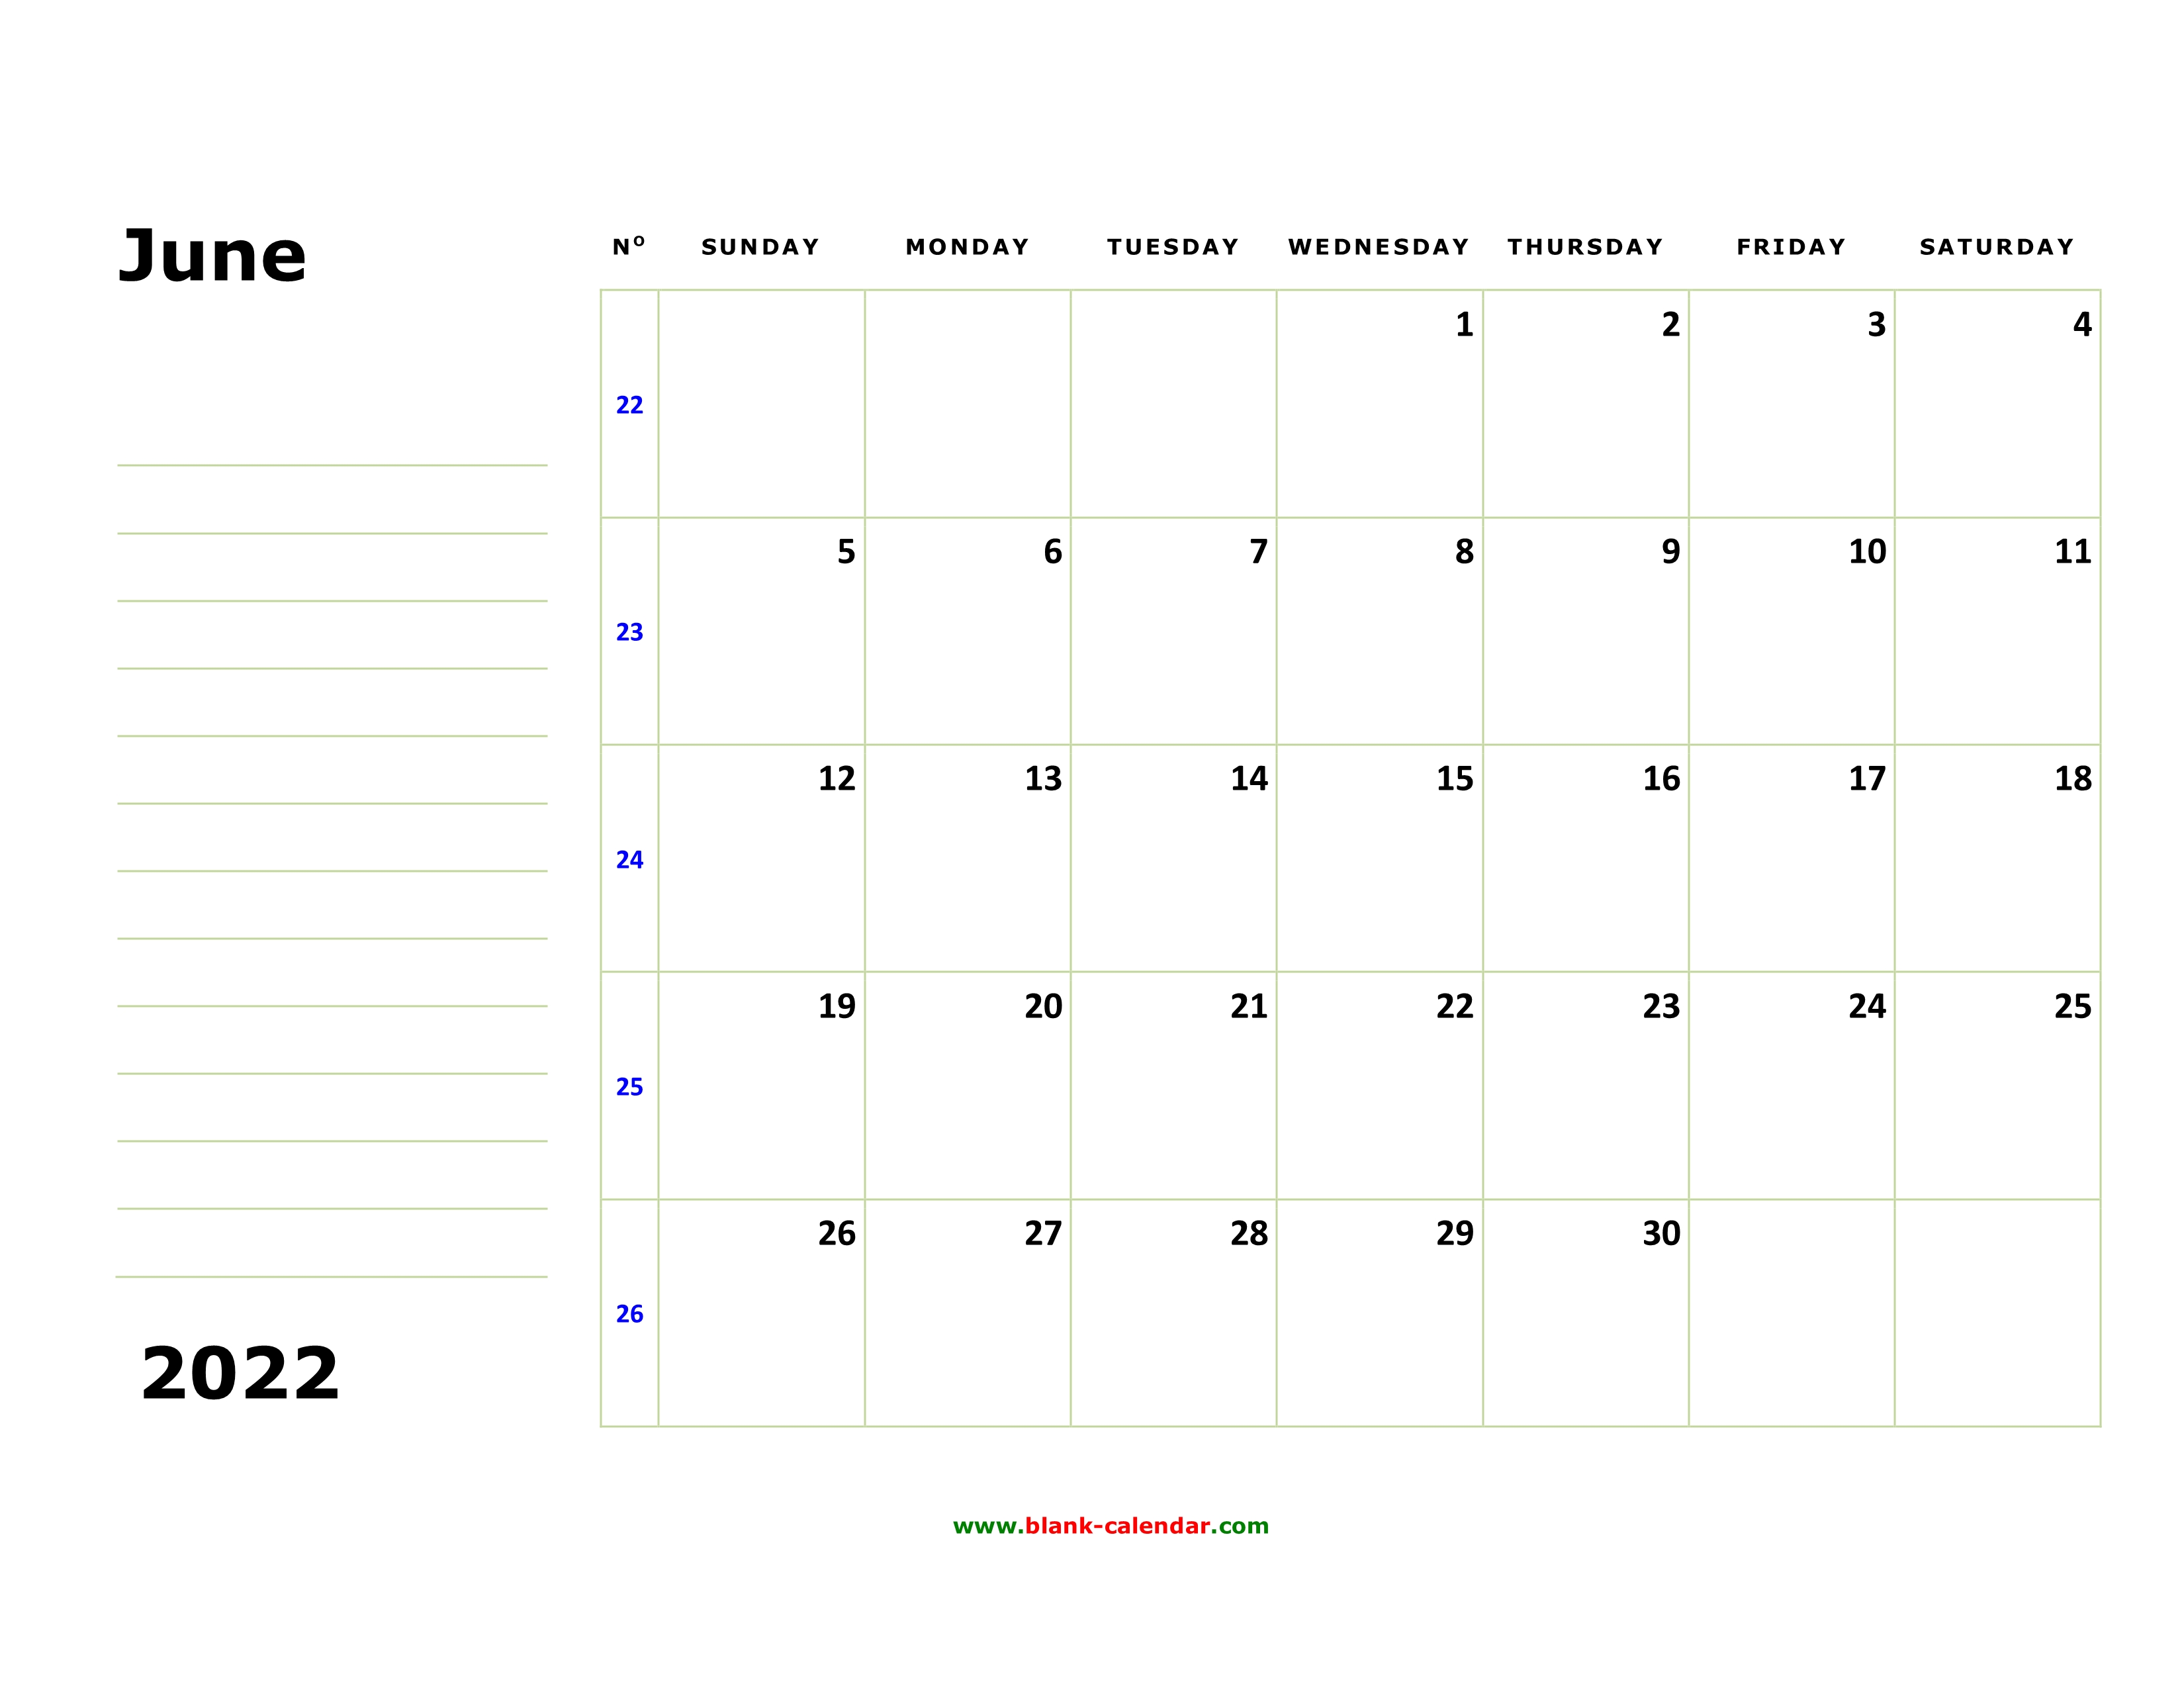 free-download-printable-june-2022-calendar-large-box-holidays-listed